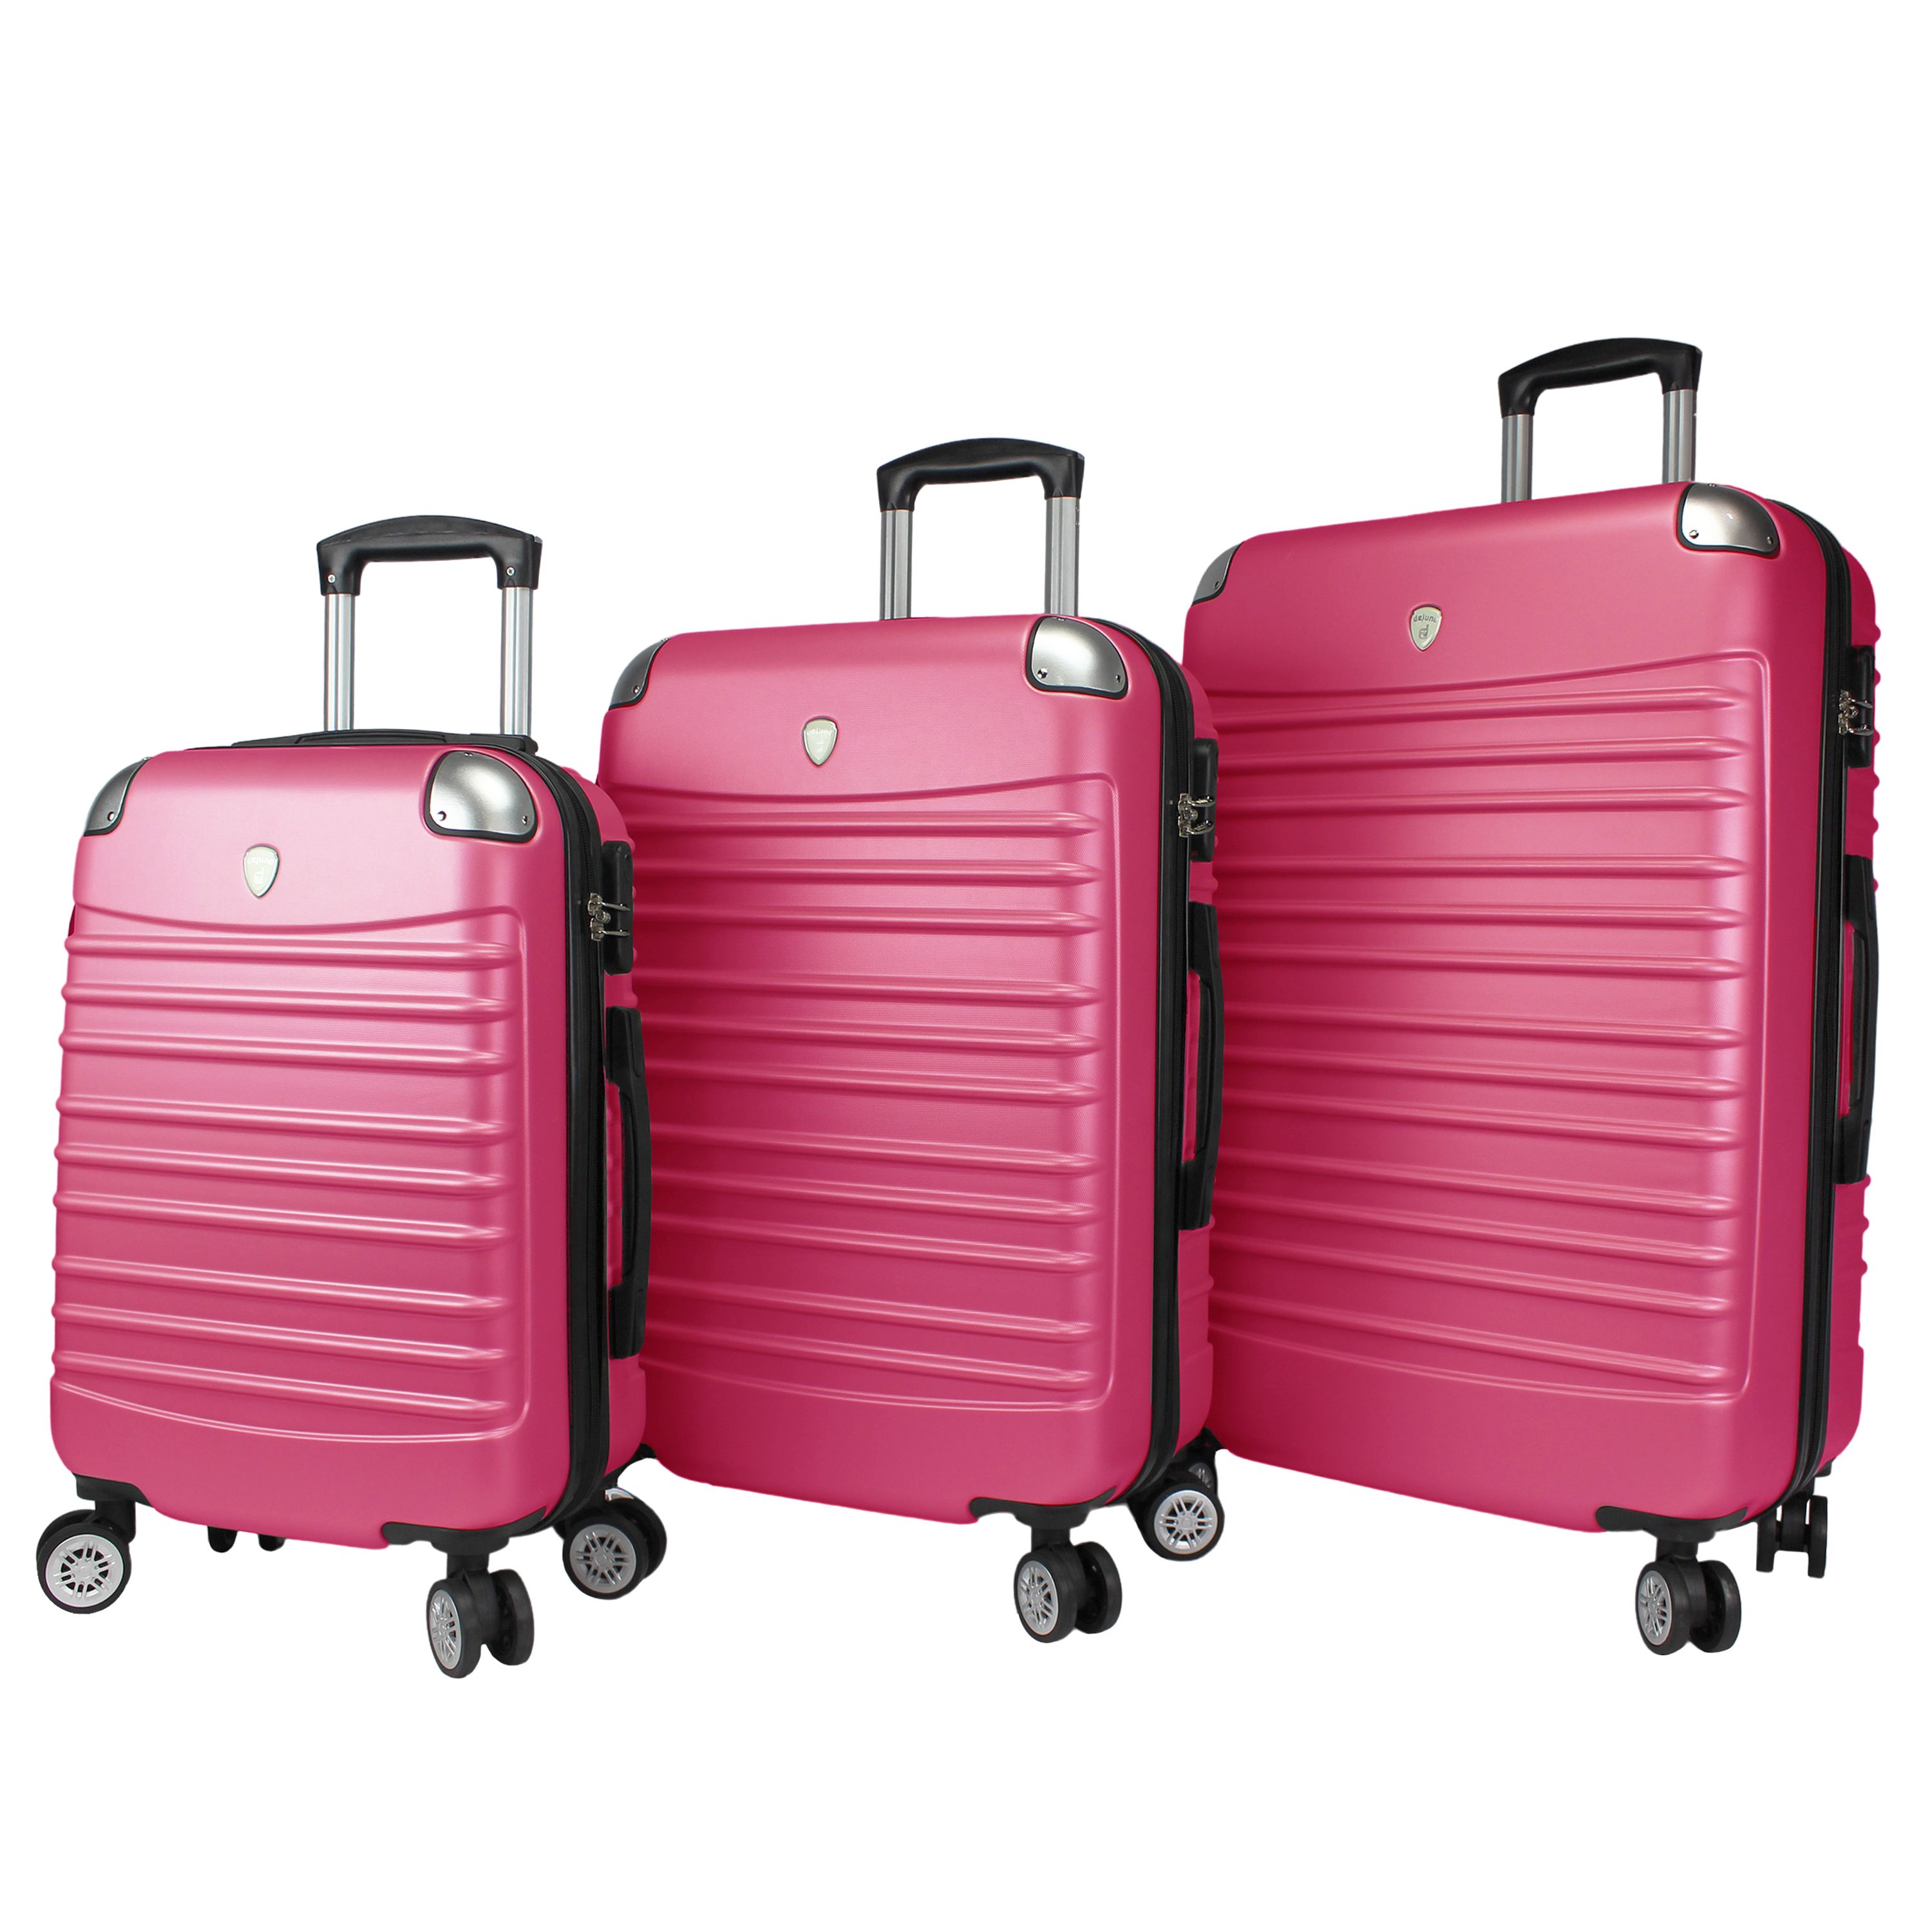 Picture of Dejuno 25DJ-610-PINK Impact Hardside Spinner Luggage Set - Pink, 3 Piece